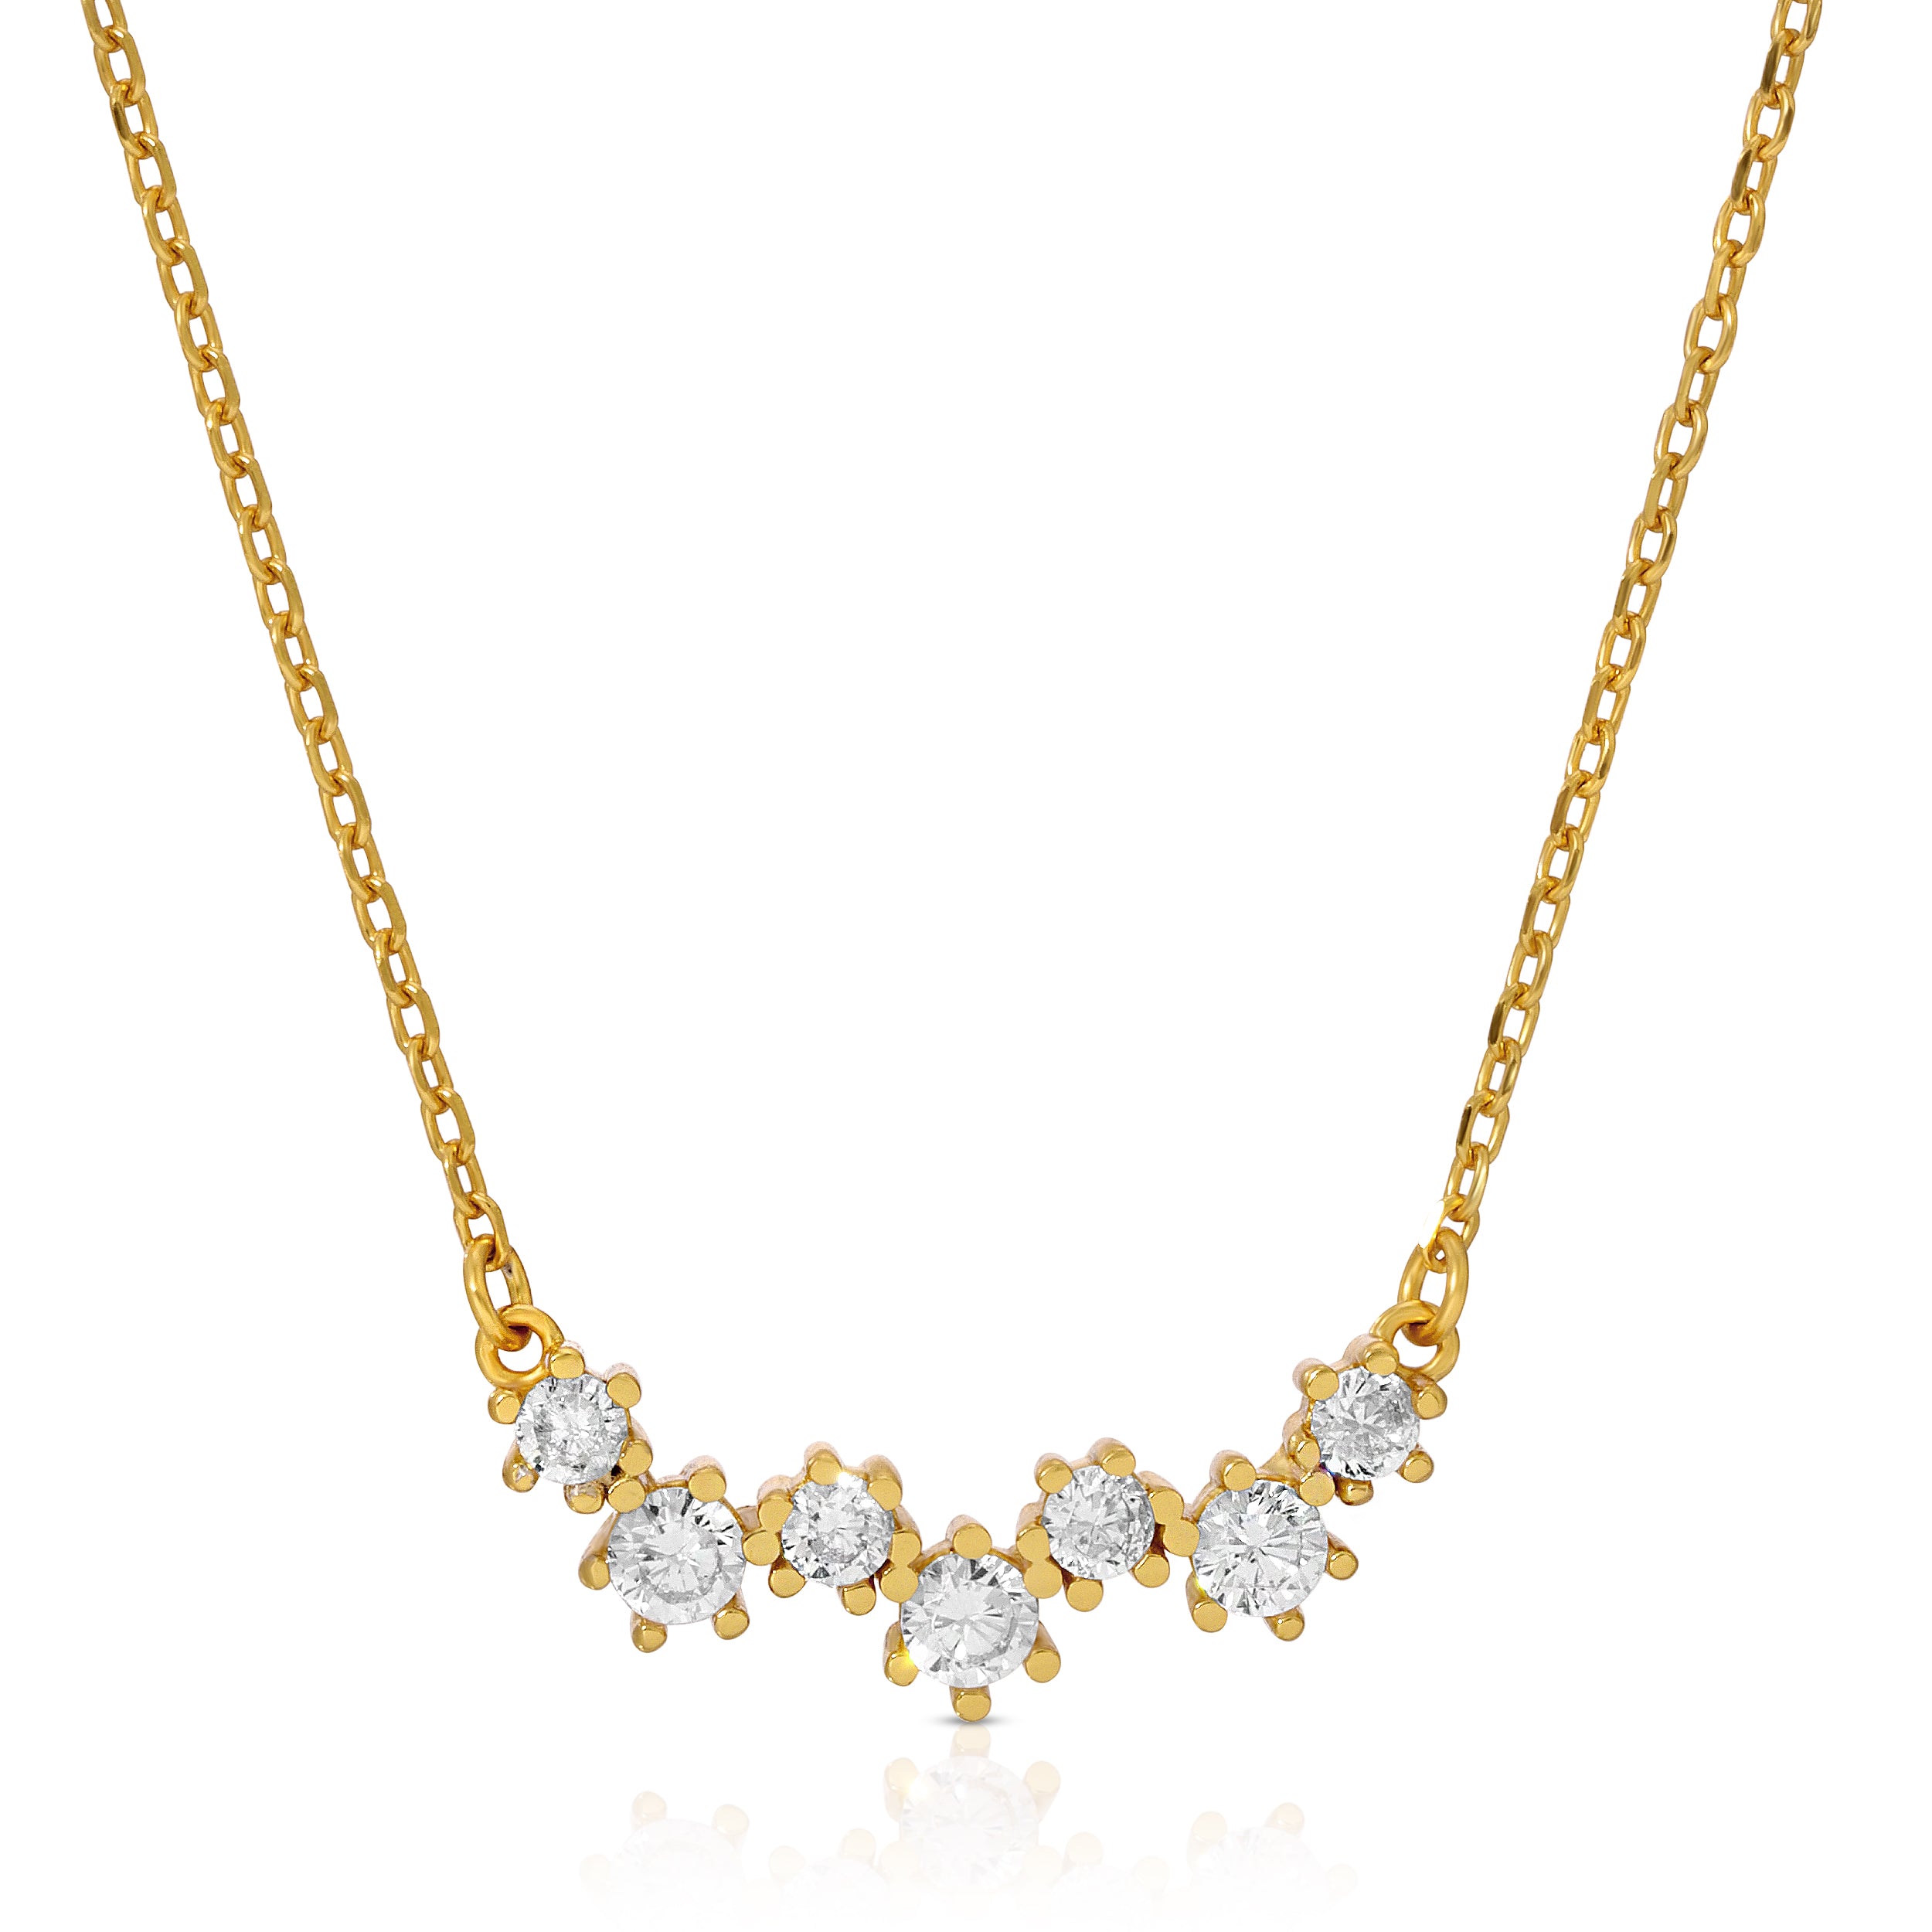  CHESKY Dainty Layered Box Necklace Chain for Women